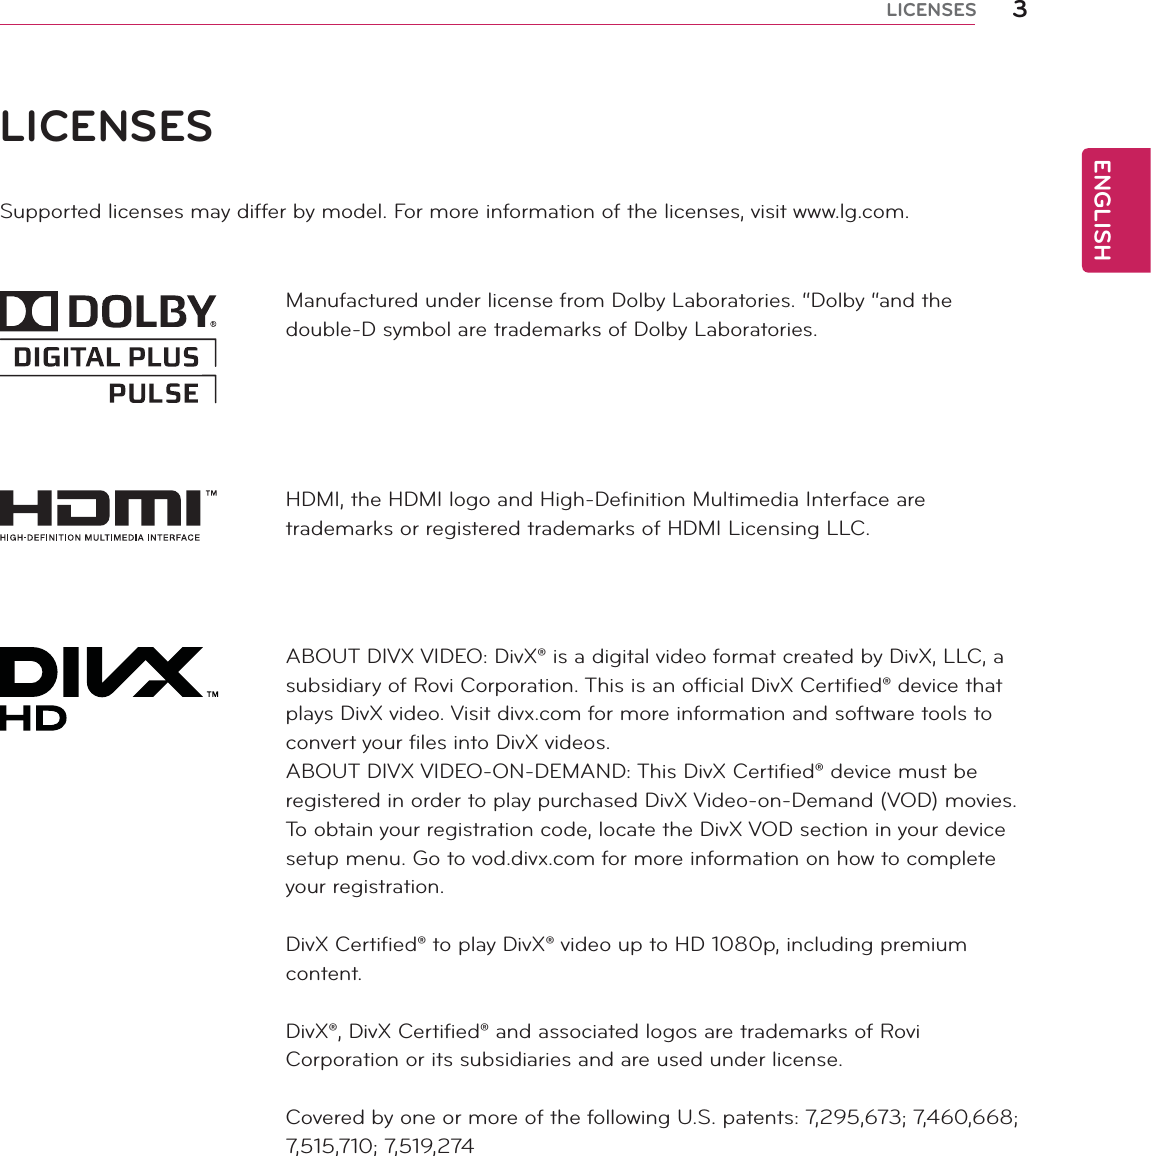 ENGLISH3LICENSESLICENSESSupported licenses may differ by model. For more information of the licenses, visit www.lg.com.Manufactured under license from Dolby Laboratories. “Dolby “and the double-D symbol are trademarks of Dolby Laboratories.HDMI, the HDMI logo and High-Definition Multimedia Interface are trademarks or registered trademarks of HDMI Licensing LLC.ABOUT DIVX VIDEO: DivX® is a digital video format created by DivX, LLC, a subsidiary of Rovi Corporation. This is an official DivX Certified® device that plays DivX video. Visit divx.com for more information and software tools to convert your files into DivX videos.ABOUT DIVX VIDEO-ON-DEMAND: This DivX Certified® device must be registered in order to play purchased DivX Video-on-Demand (VOD) movies. To obtain your registration code, locate the DivX VOD section in your device setup menu. Go to vod.divx.com for more information on how to complete your registration.DivX Certified® to play DivX® video up to HD 1080p, including premium content.DivX®, DivX Certified® and associated logos are trademarks of Rovi Corporation or its subsidiaries and are used under license.Covered by one or more of the following U.S. patents: 7,295,673; 7,460,668; 7,515,710; 7,519,274